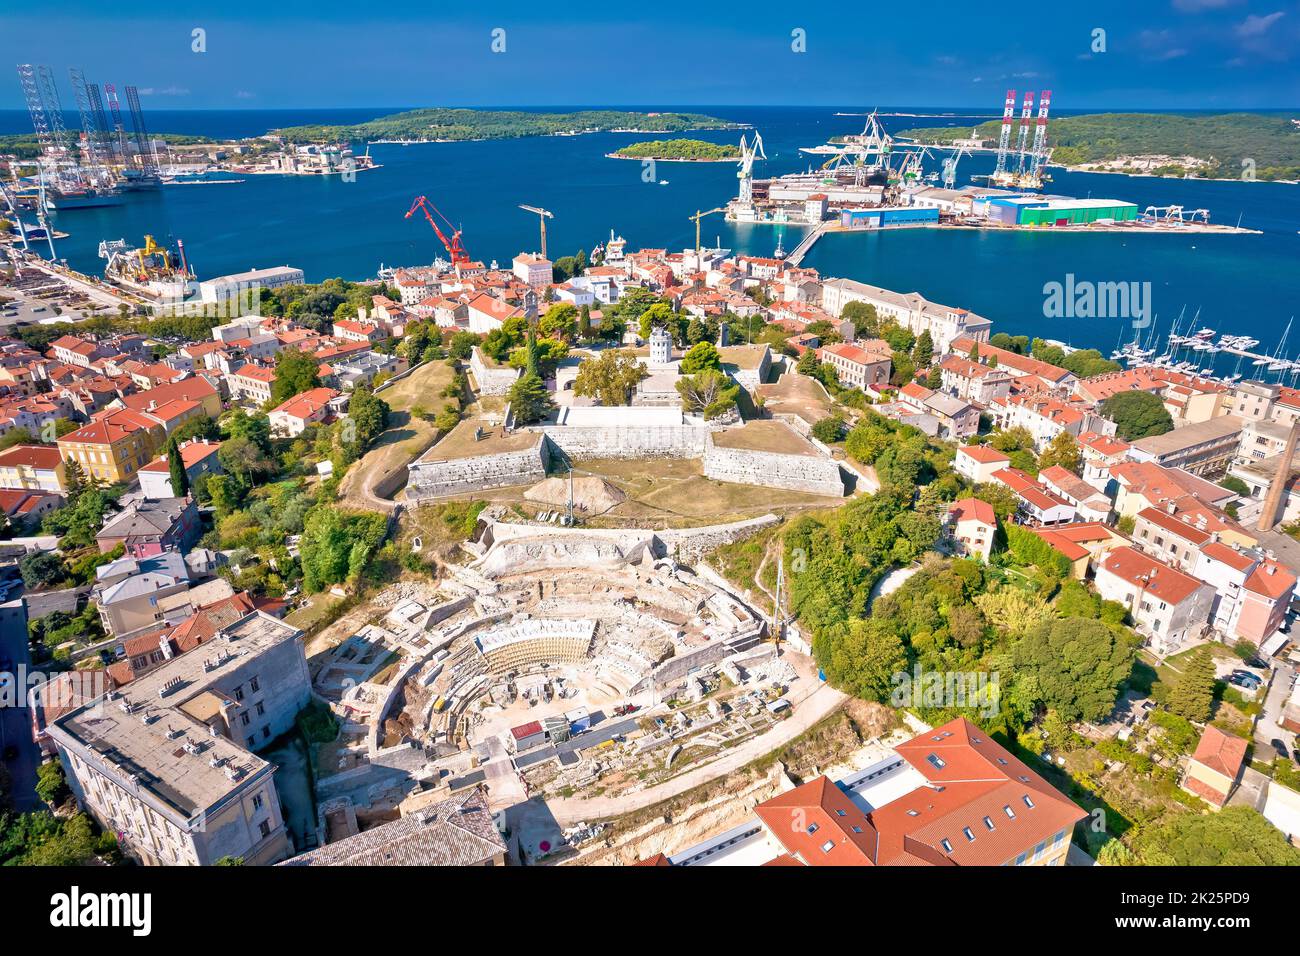 Pula, Istria. Defense fortress and bay of Pula aerial view Stock Photo